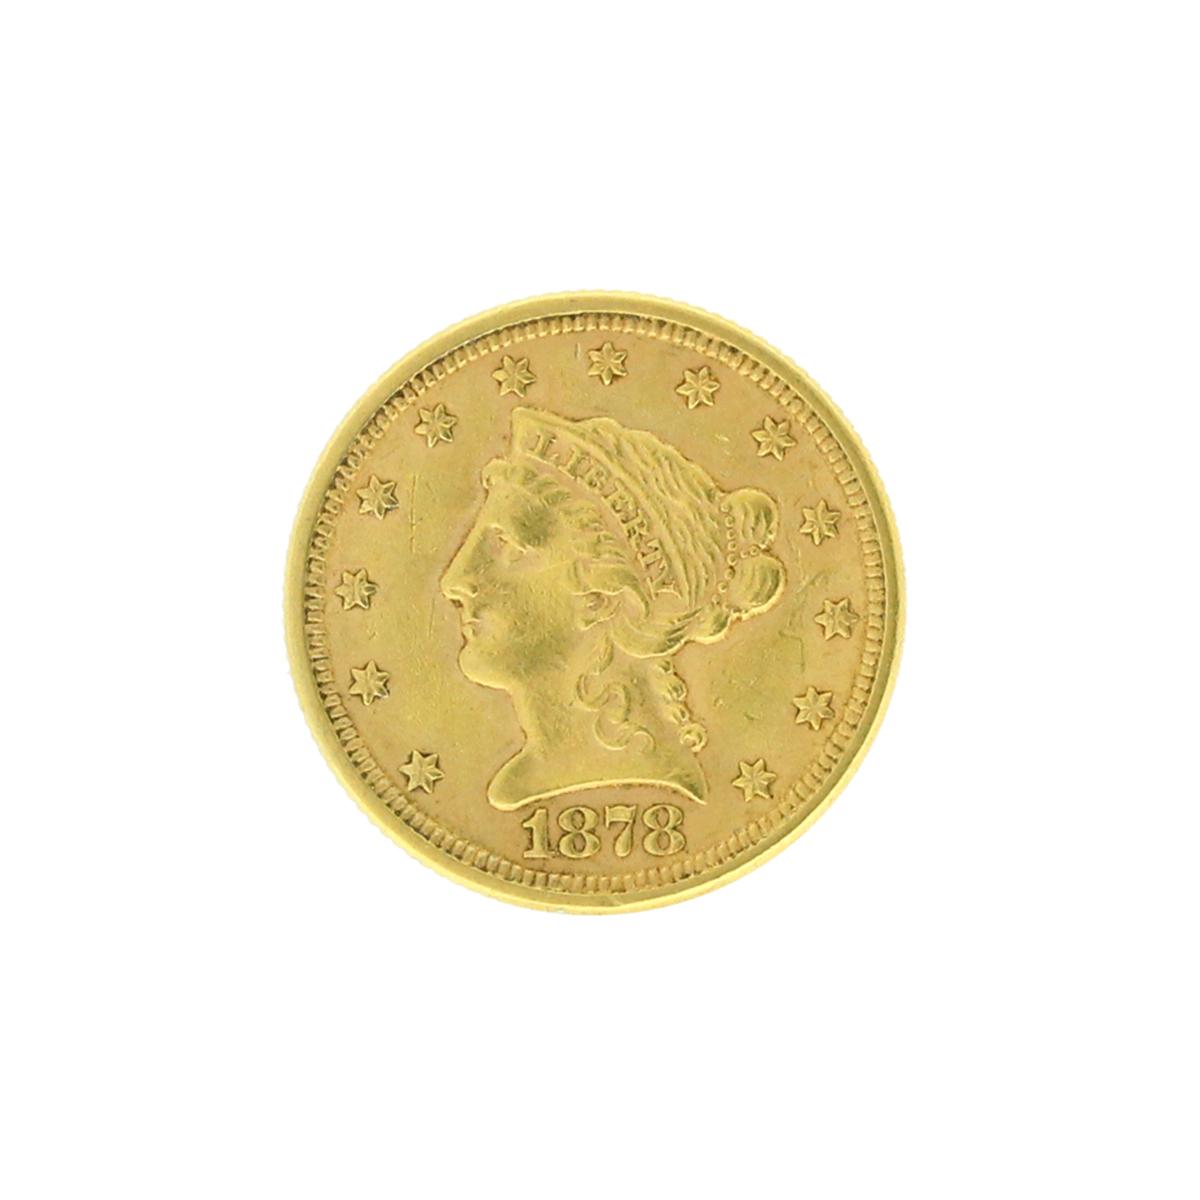 Rare 1878 $2.50 Liberty Head Gold Coin Great Investment